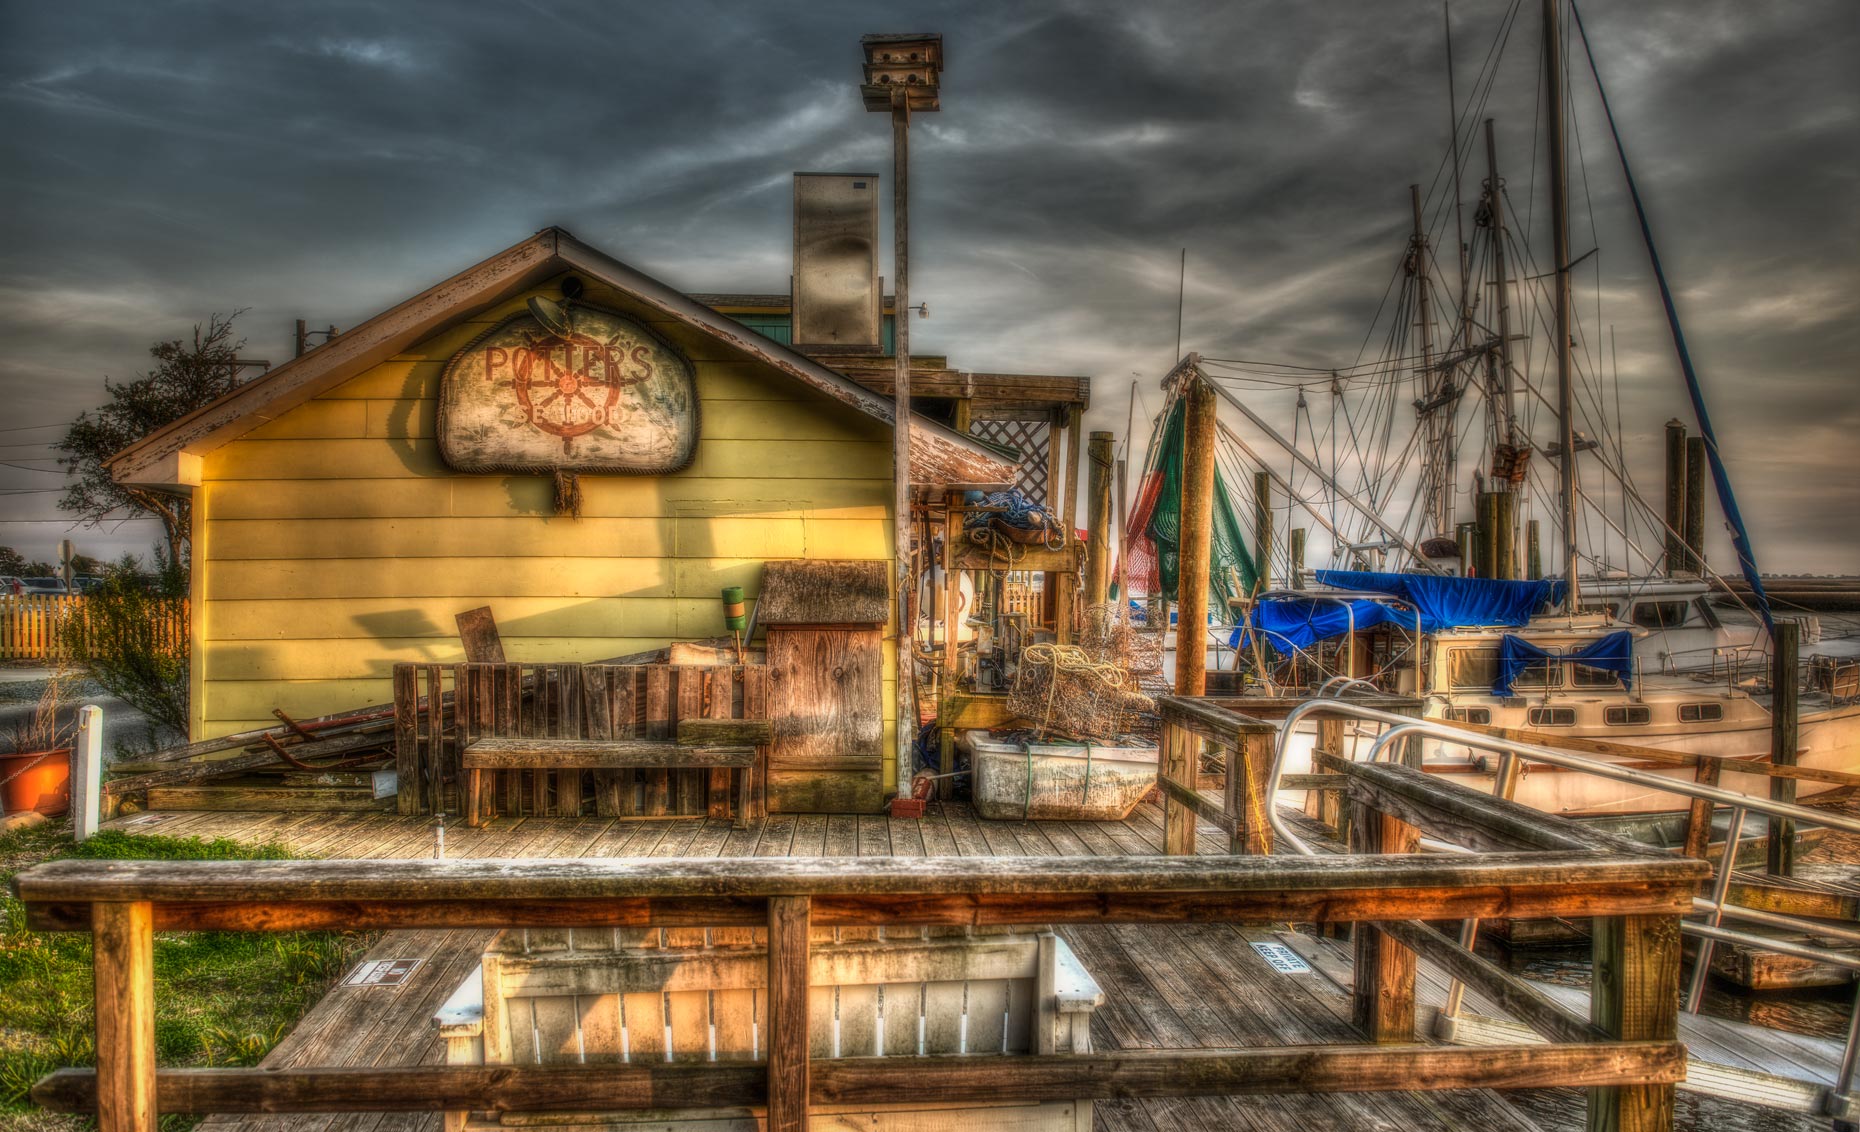 SouthPortPortersSeafood